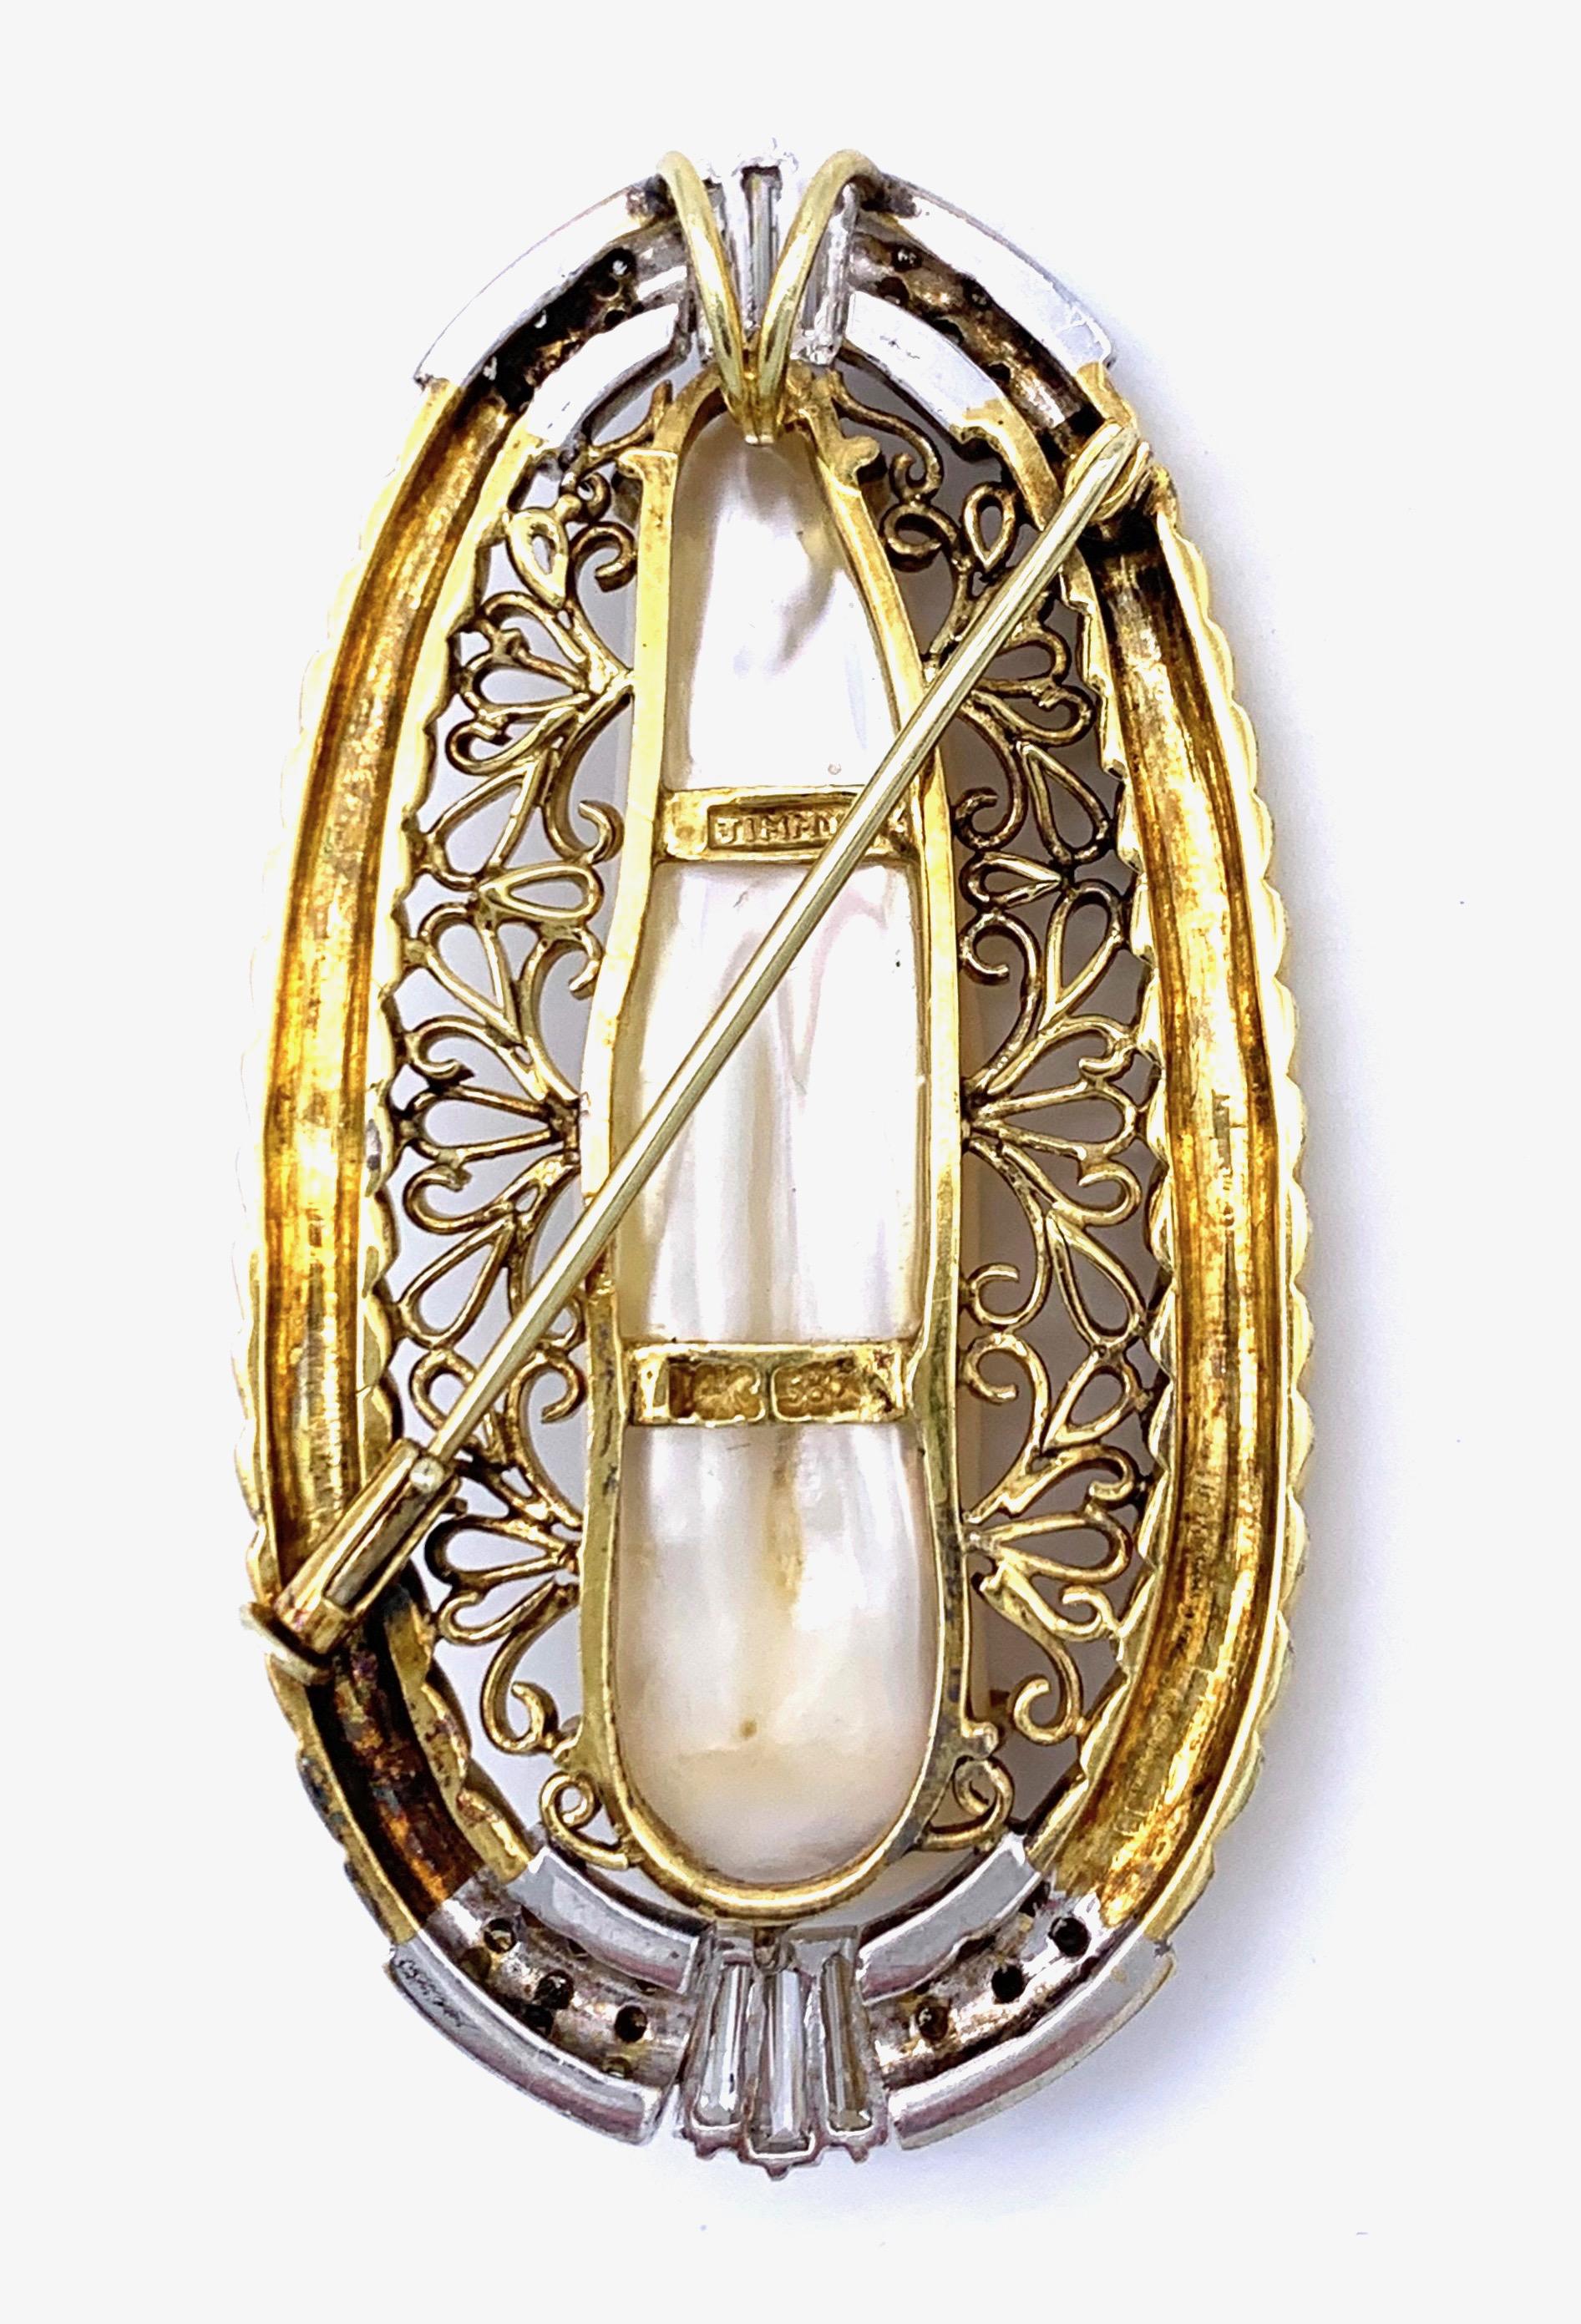 This junky statement pendant can also be worn as a brooch. The wonderful keshi pearl is claw set and surrounded by gold wire ornaments within a golden frame designed as a rope. The top and the bottom of the pendant are highlighted by white gold set